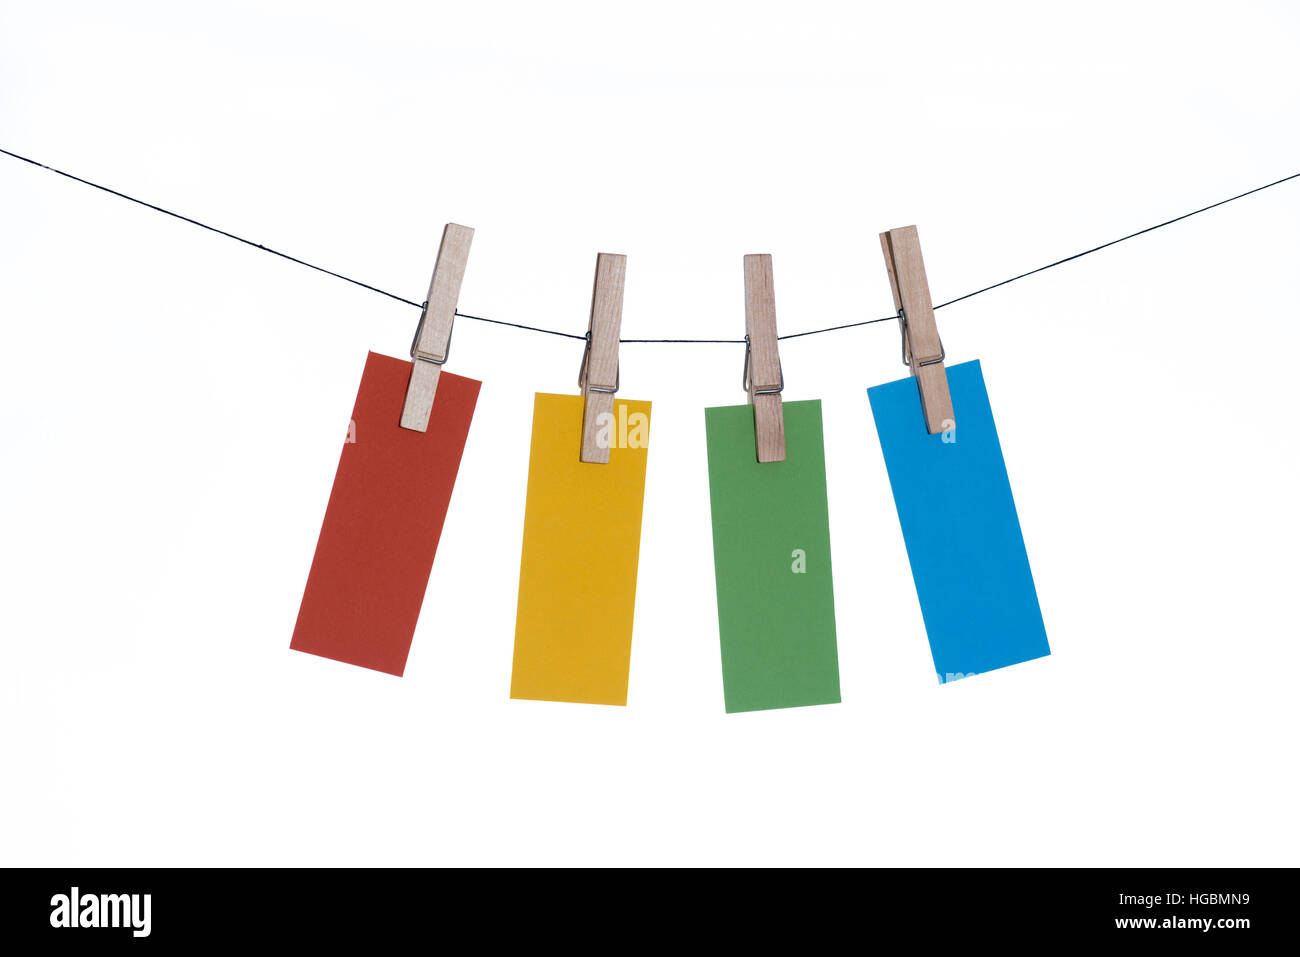 Hanging cards - four pieces of colored paper hanging from a line by clothes pegs Stock Photo